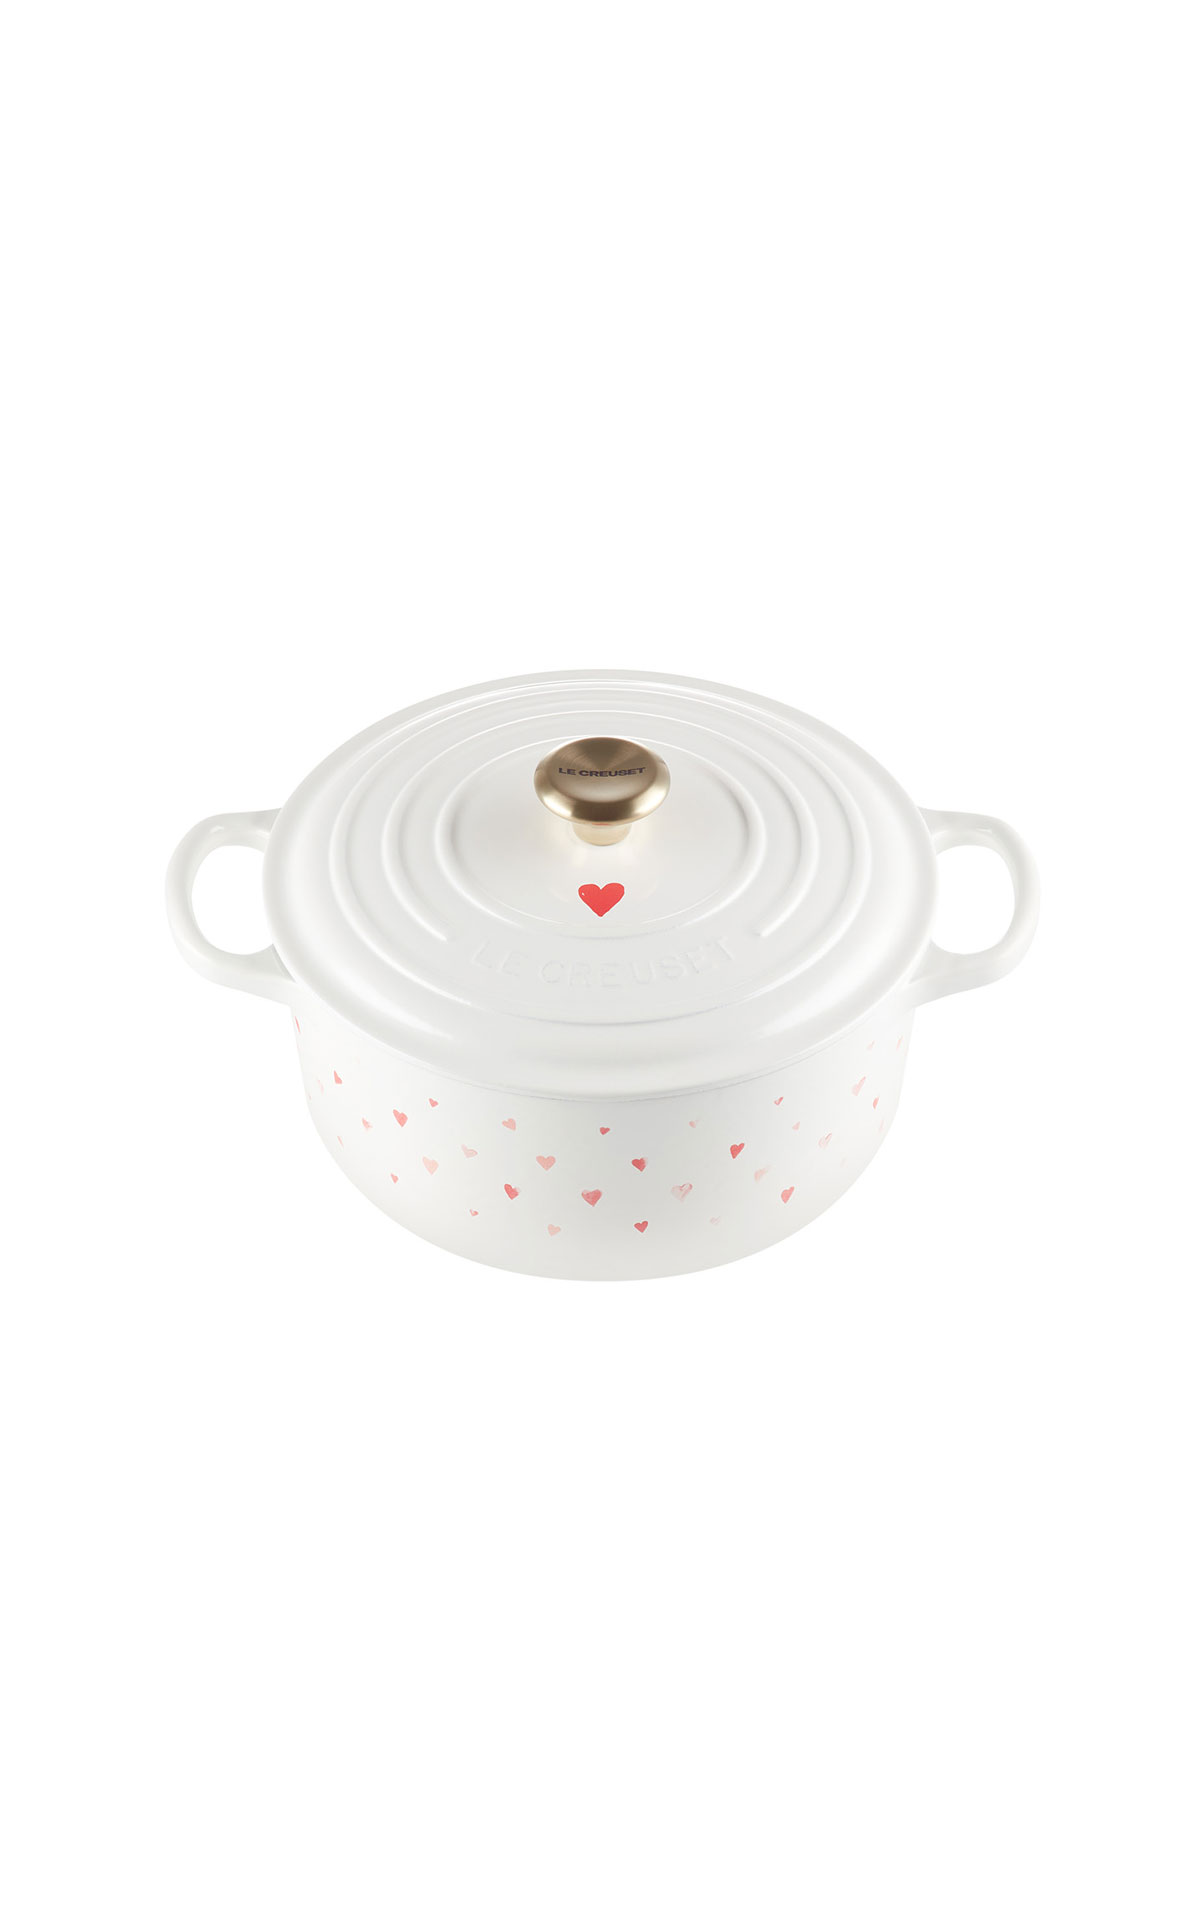 Le Creuset Cast iron hearts decal round casserole 22cm White from Bicester Village